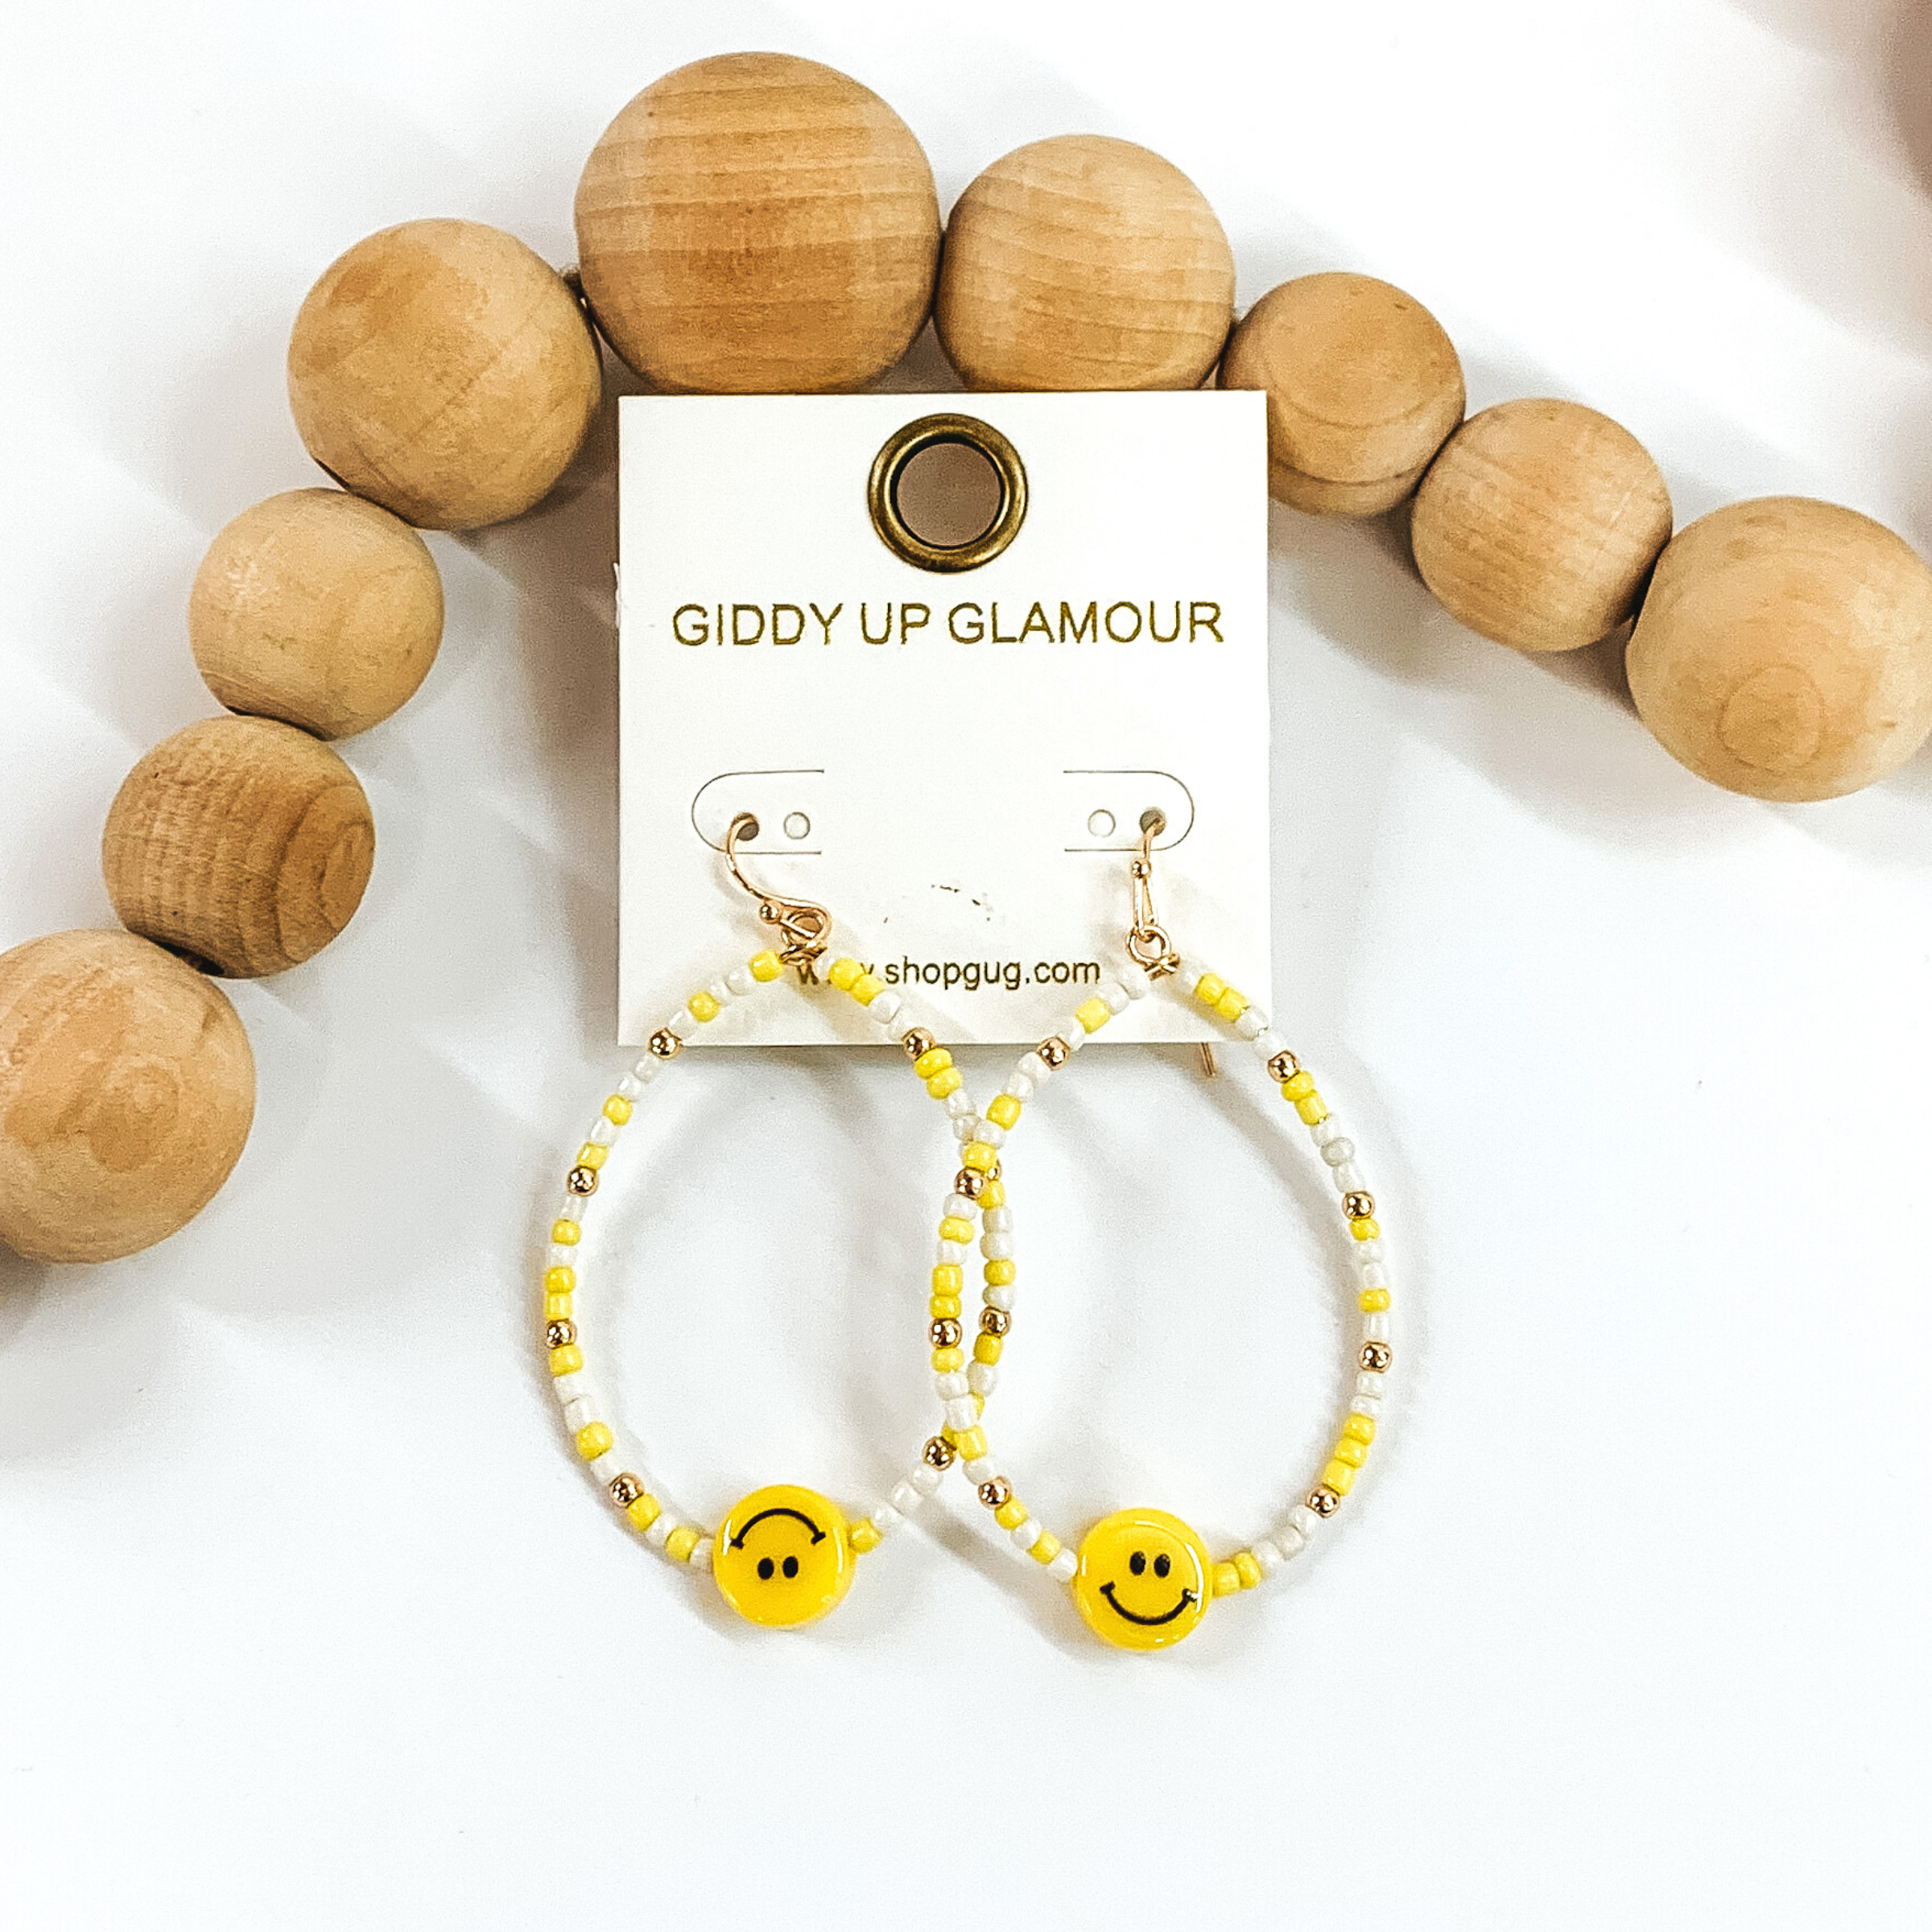 Hanging teardrop earrings with hanging yellow smiley faces. These earrings are covered in white and yellow beads with gold spacers. These earrings are pictured laying next to some tan beads on a white background.